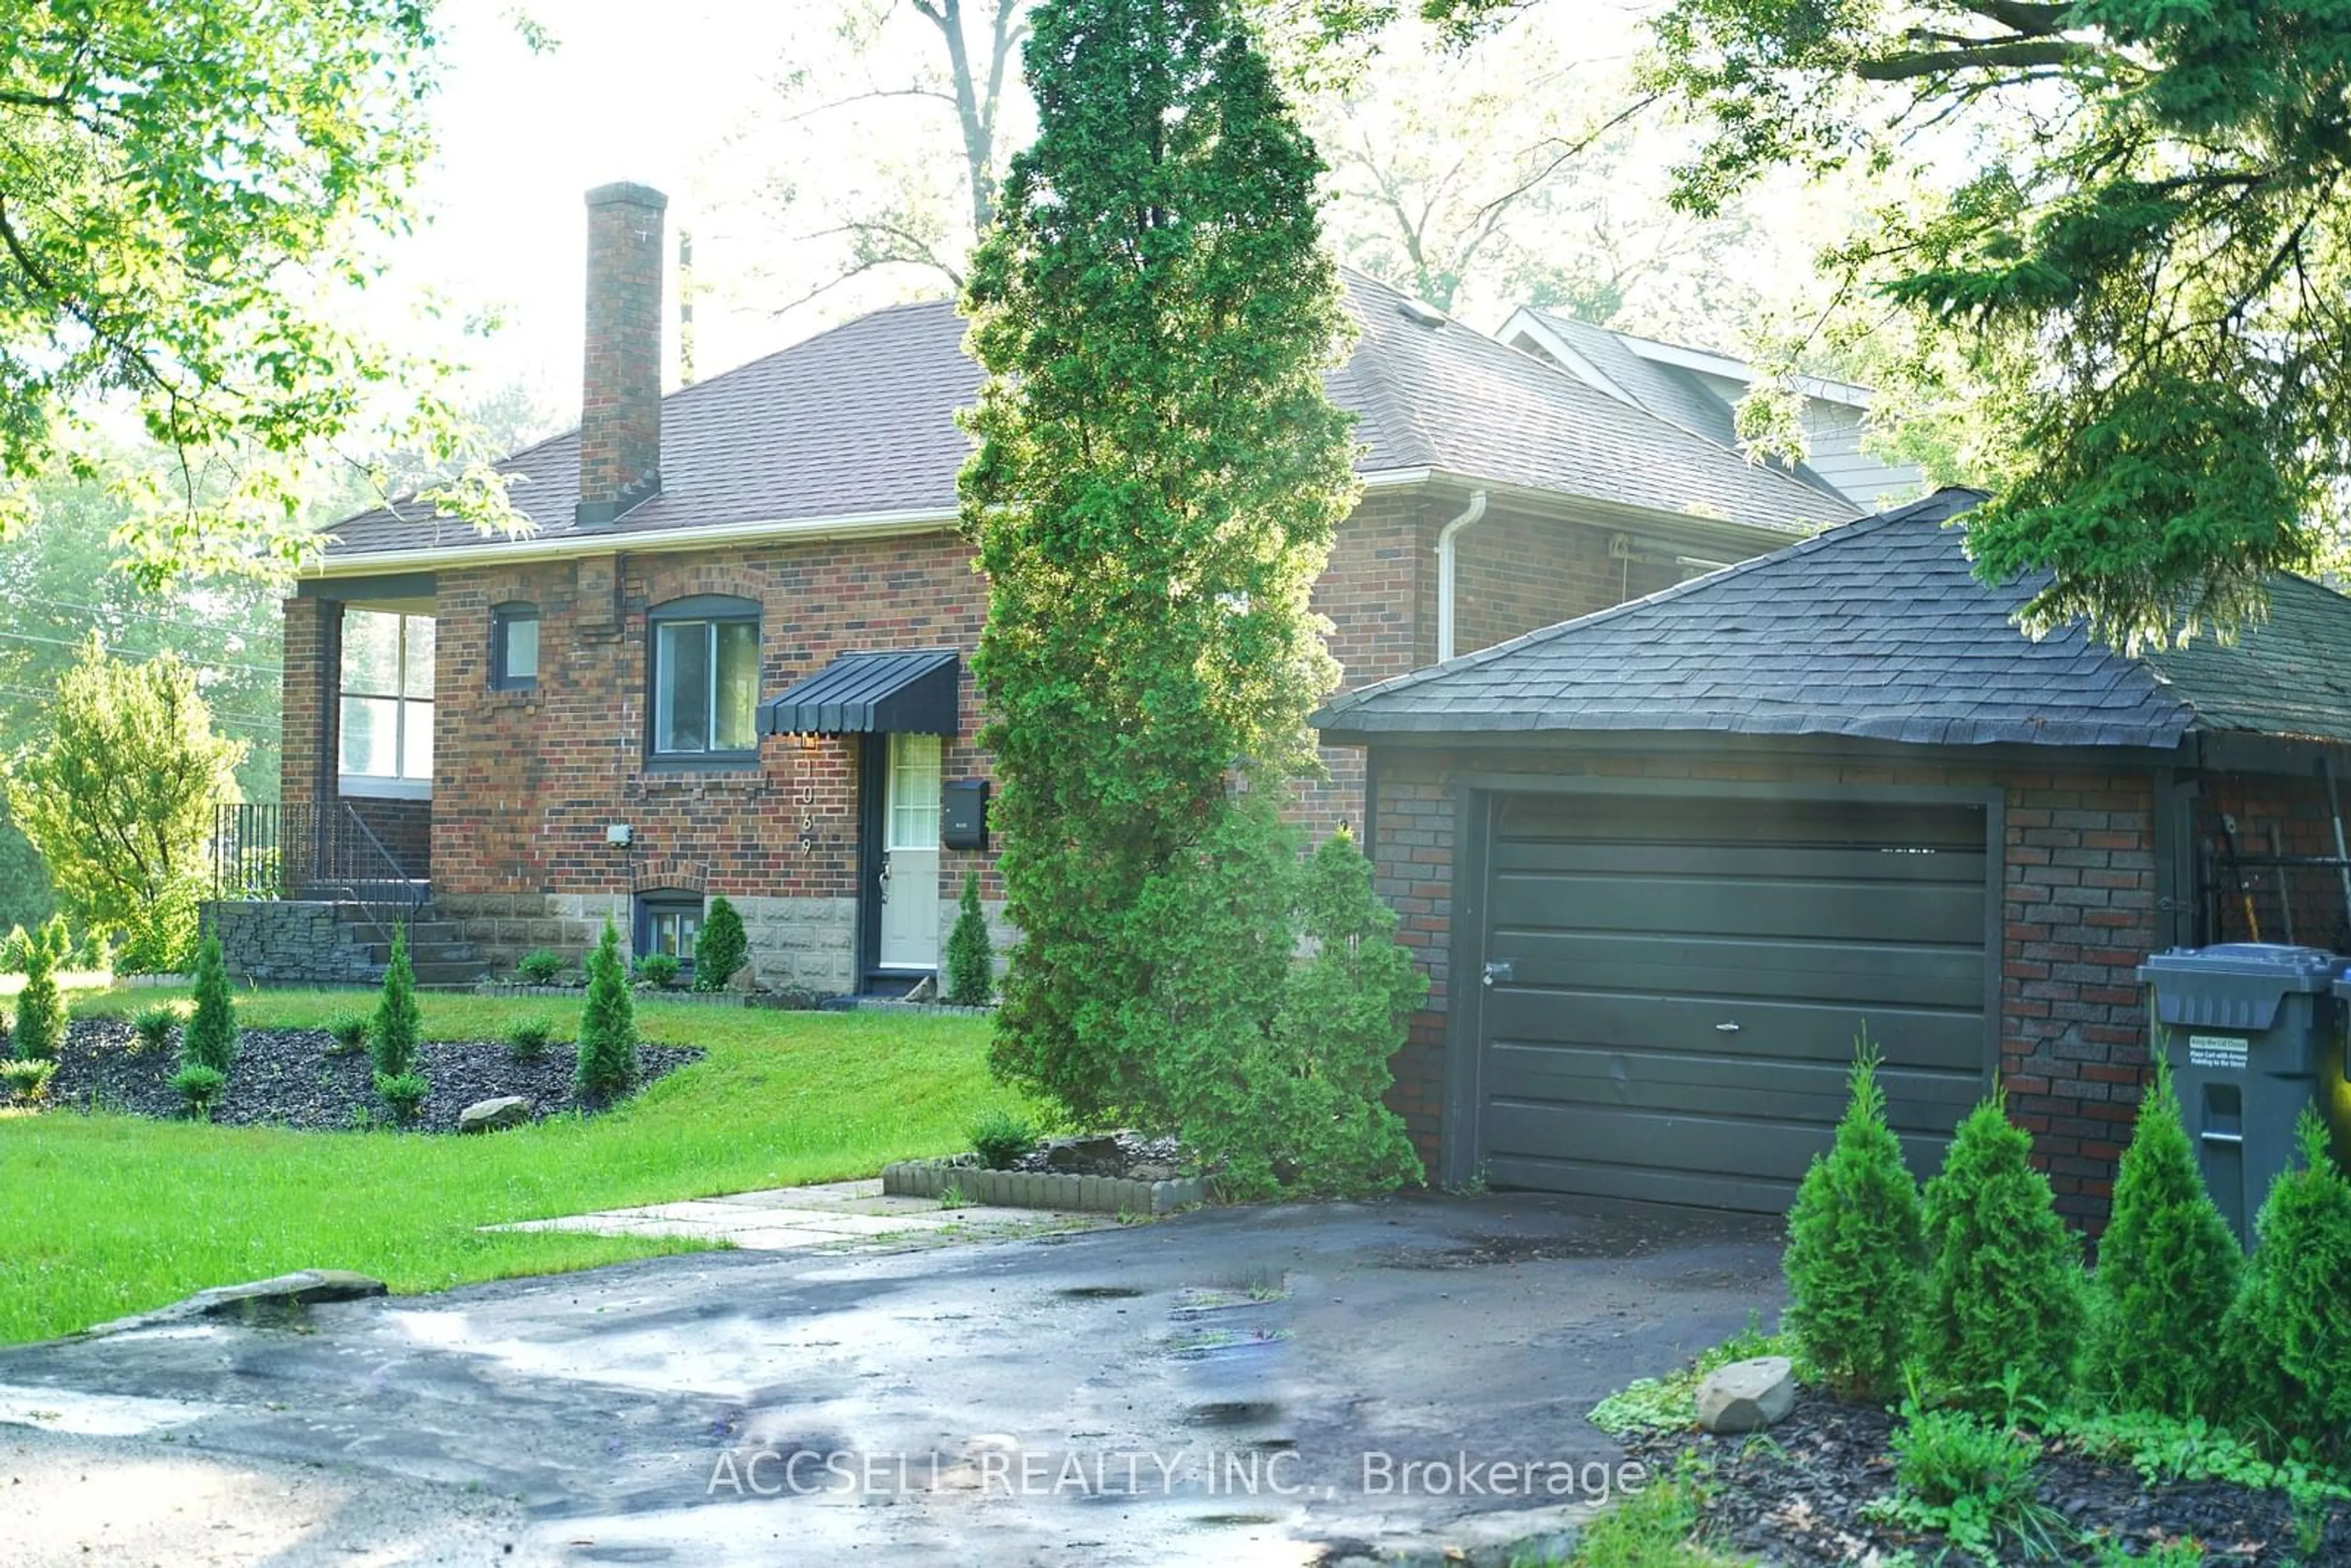 Home with brick exterior material for 1069 Dixie Rd, Mississauga Ontario L5E 2P5